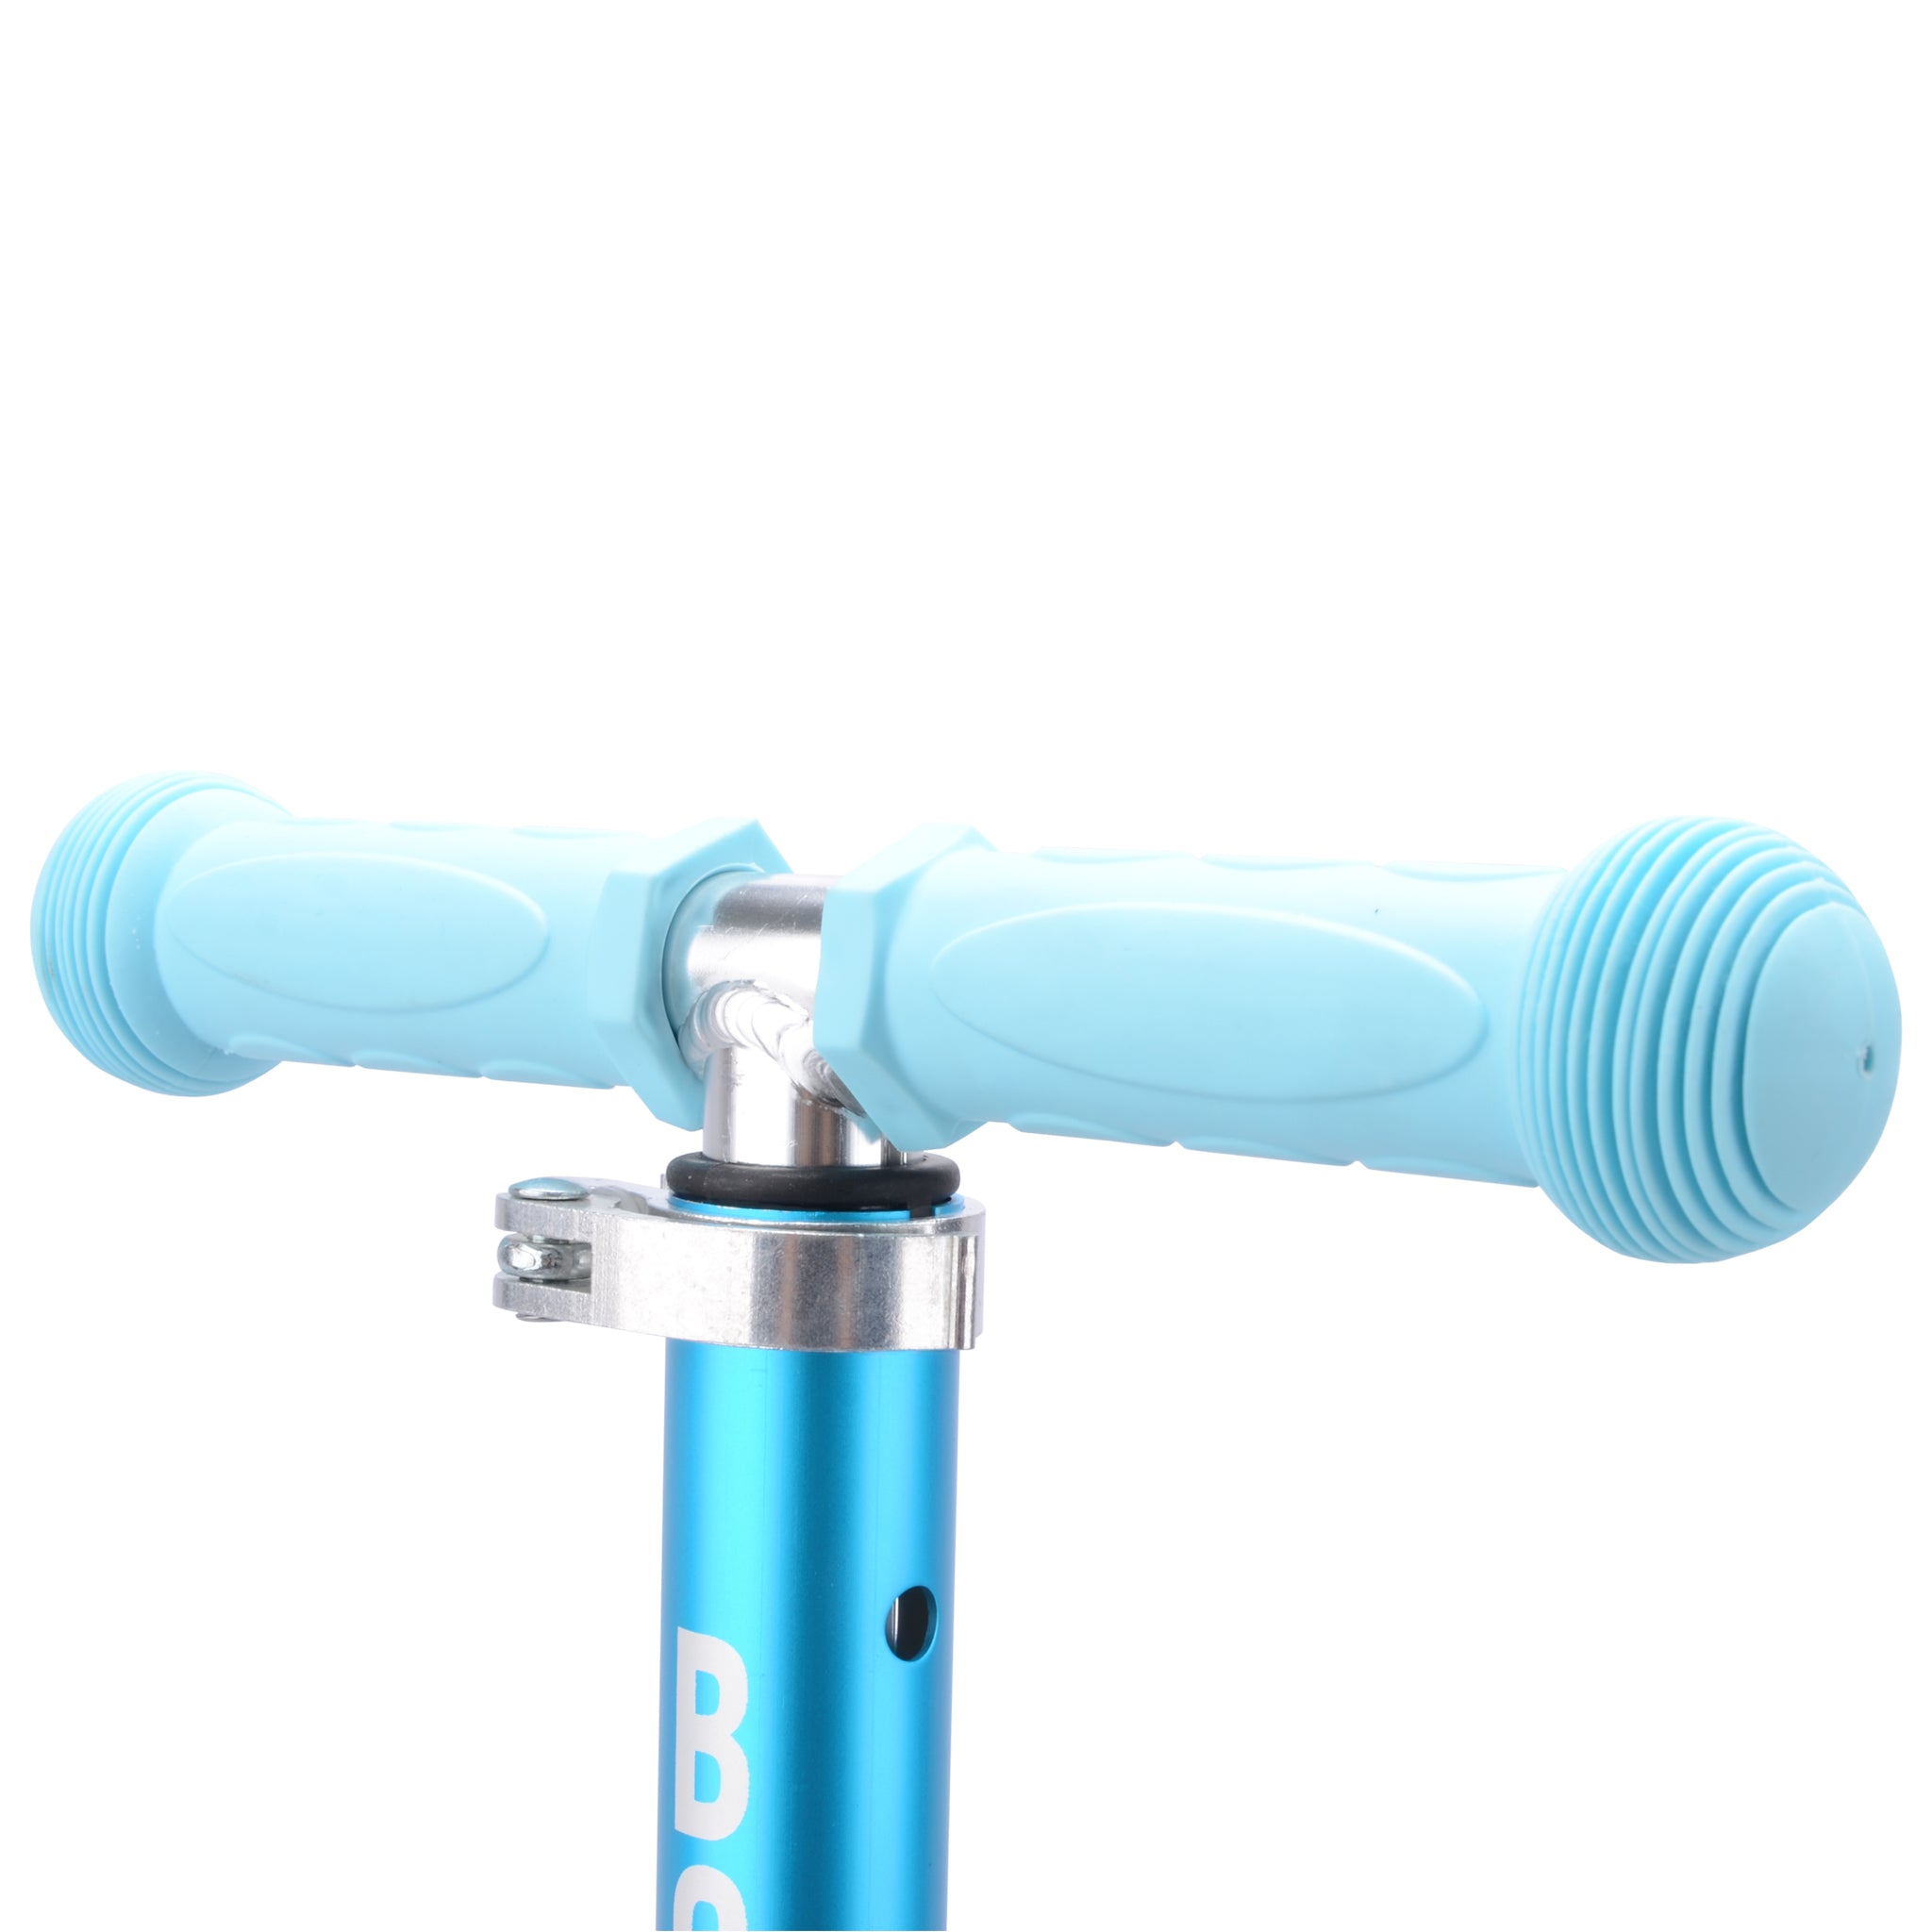 Foldable Teeny Scooter  Blue